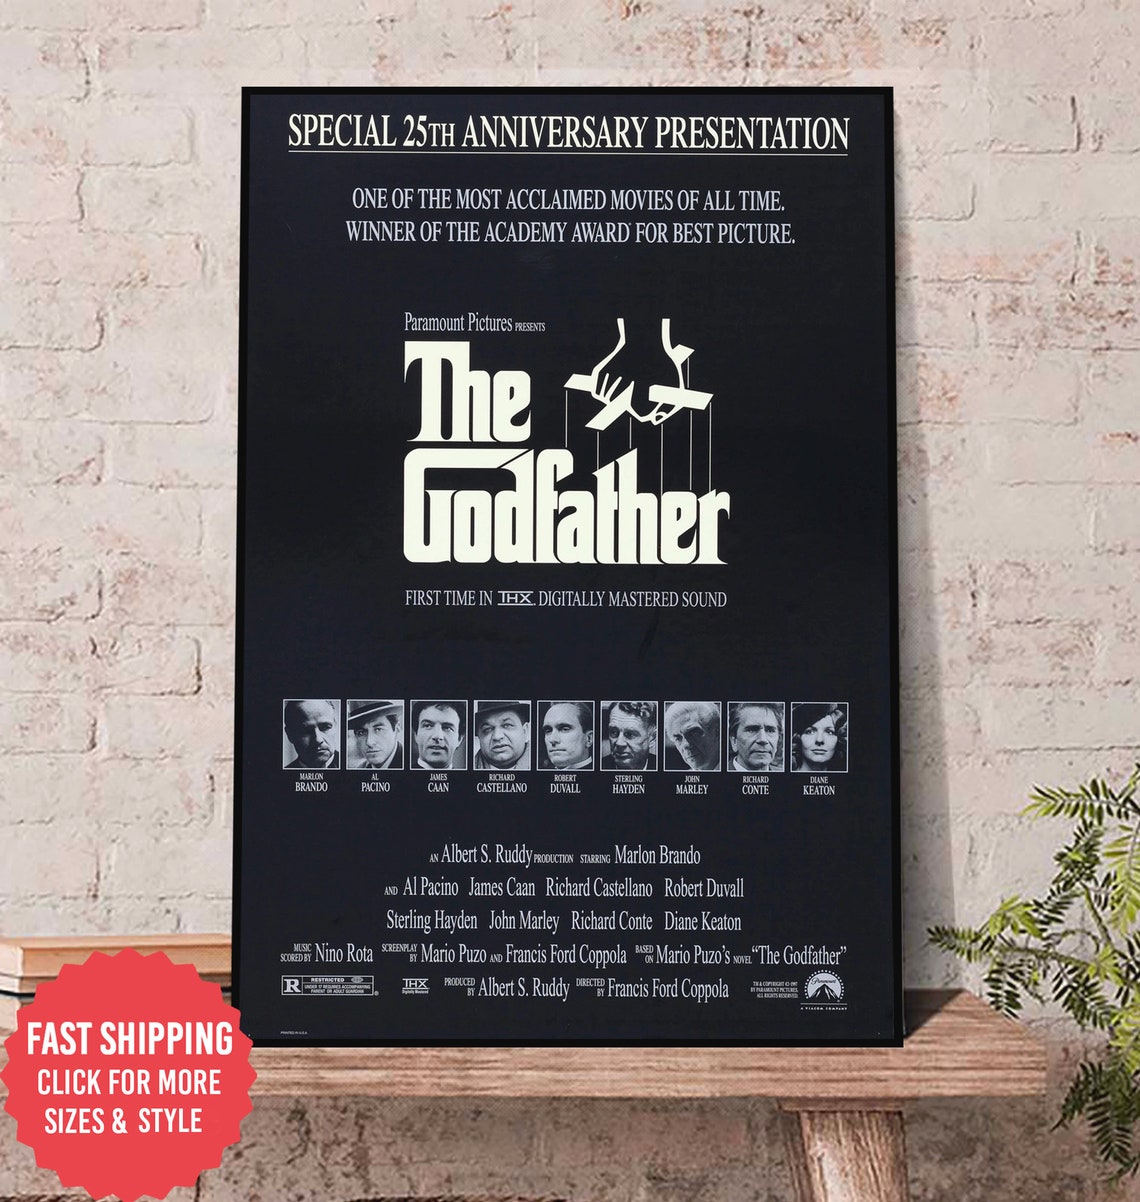 The Godfather 1972 Canvas Poster, God father Poster, Old Movie Poster, the godfather original poster, Vintage Movie Poster 